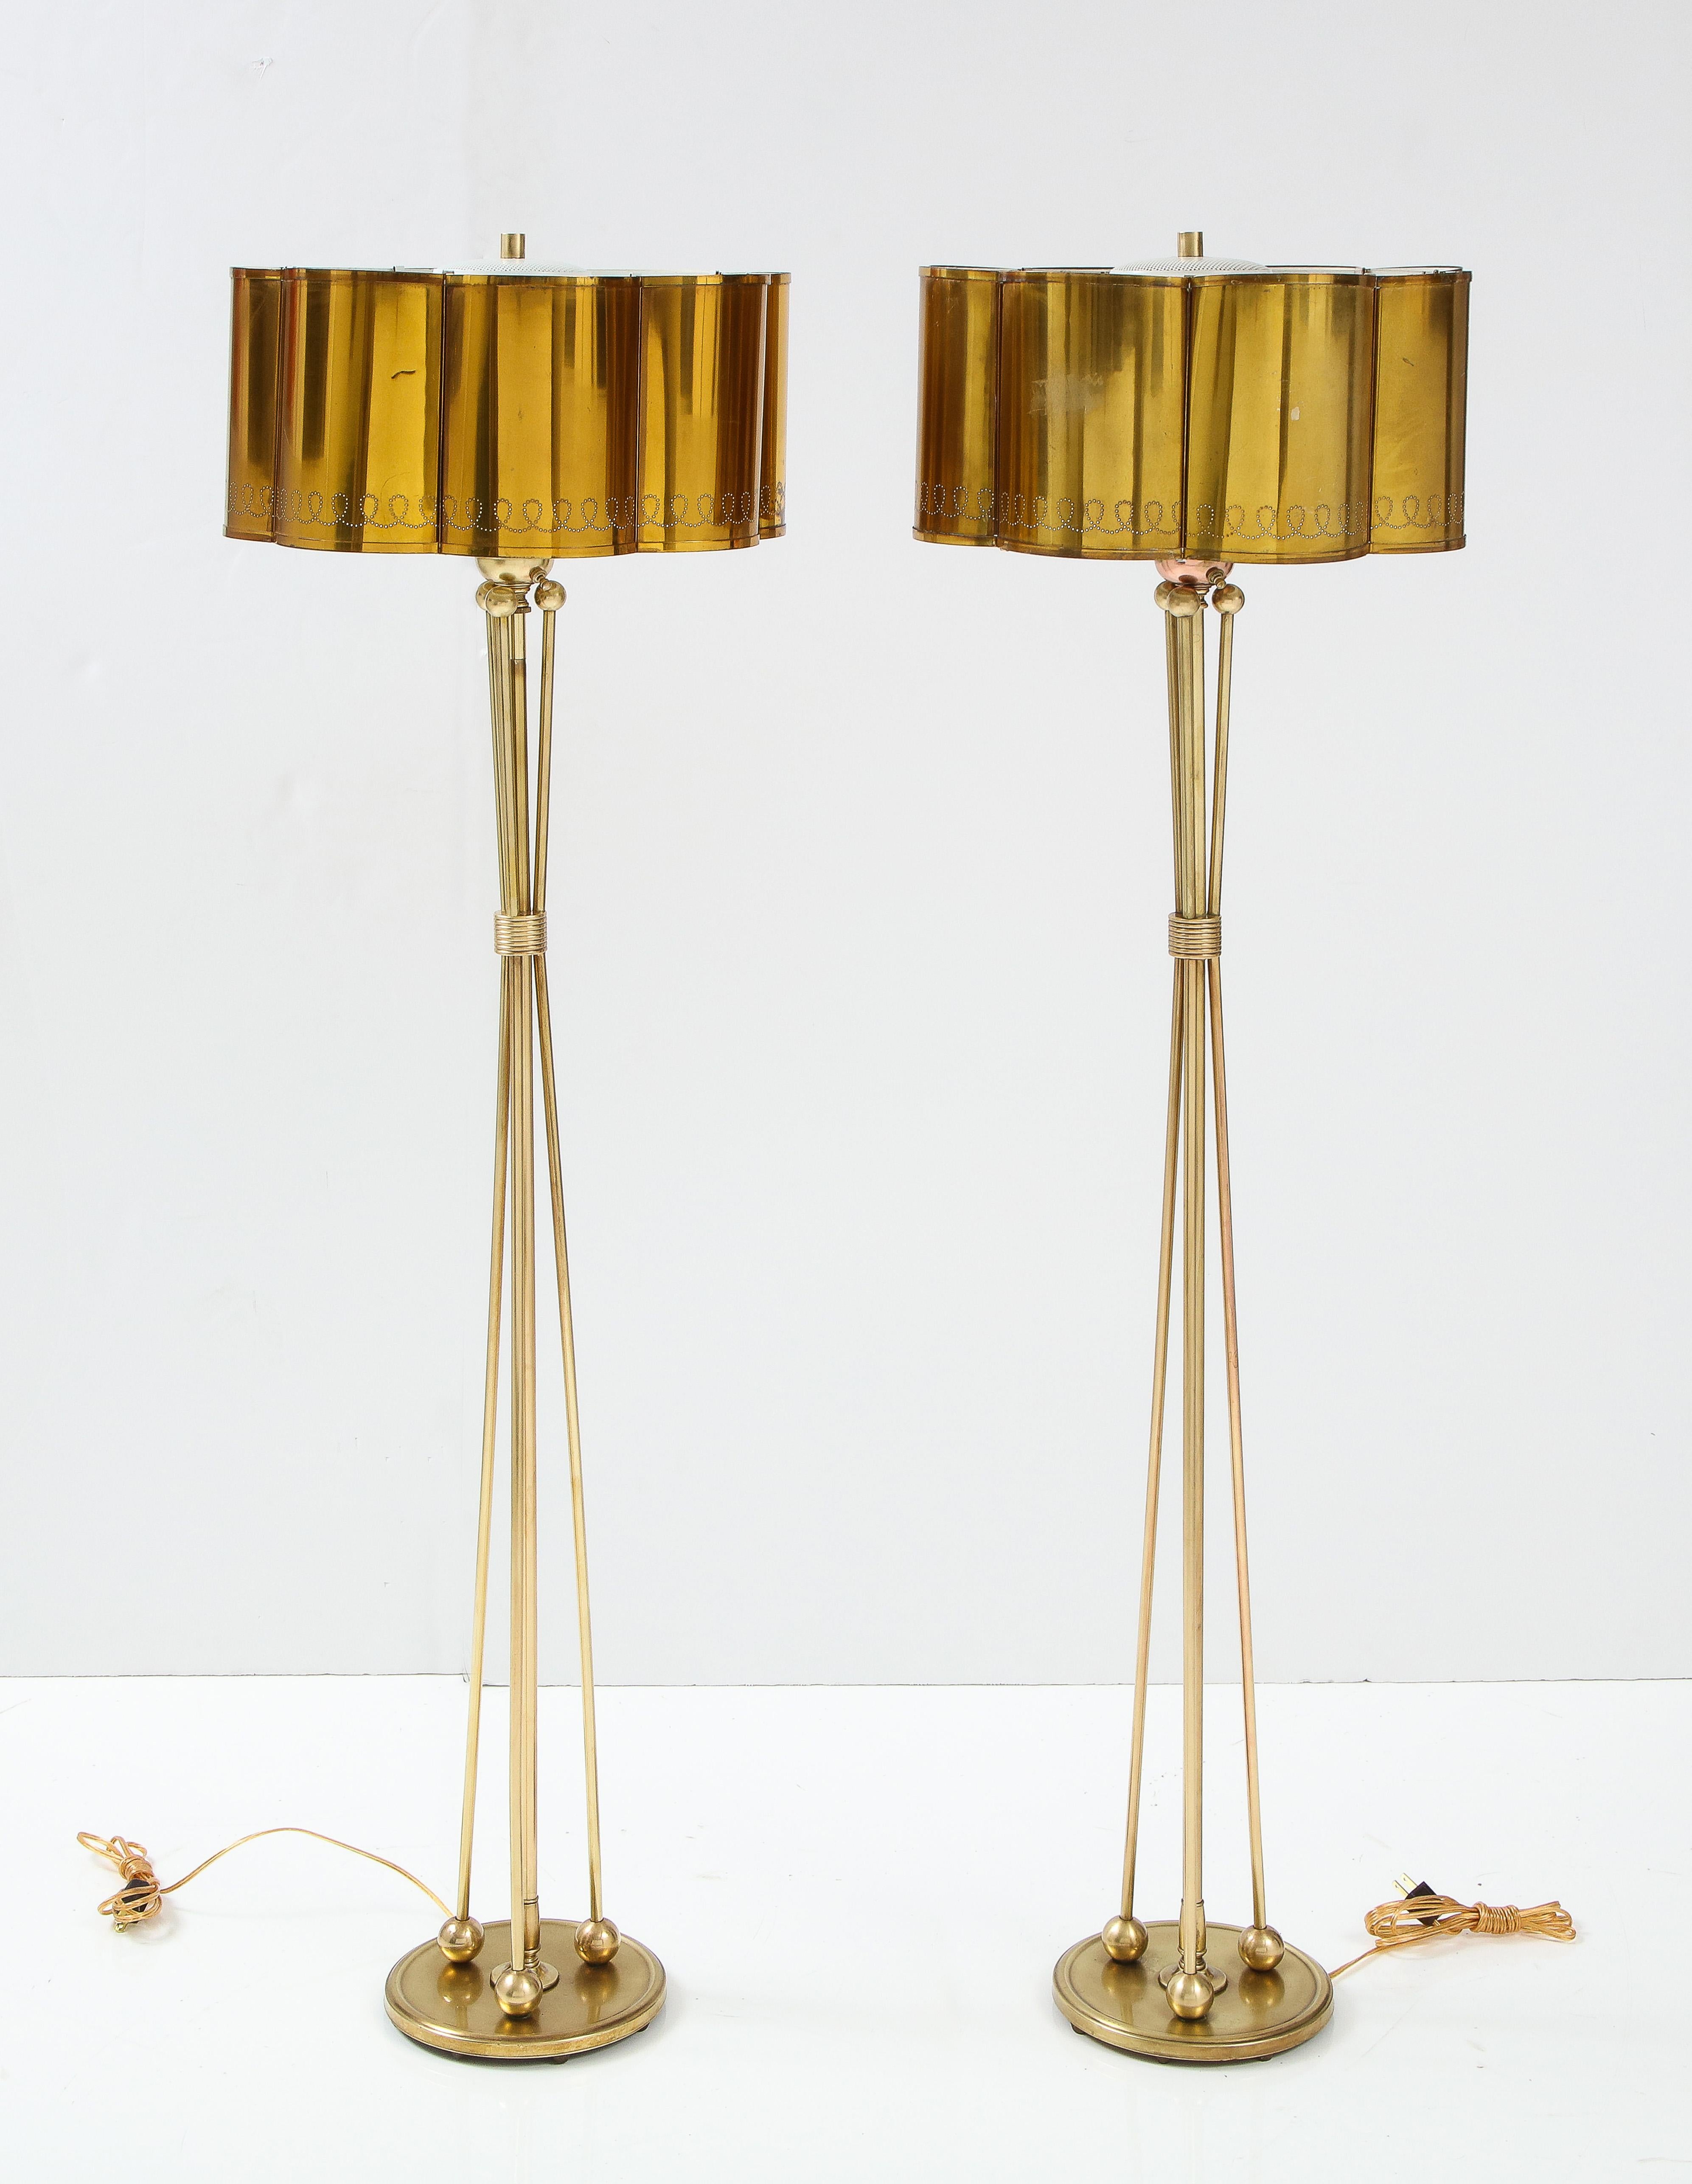 1950's French Solid Brass with Perforated Lamps Shades Tripod Floor Lamps 9